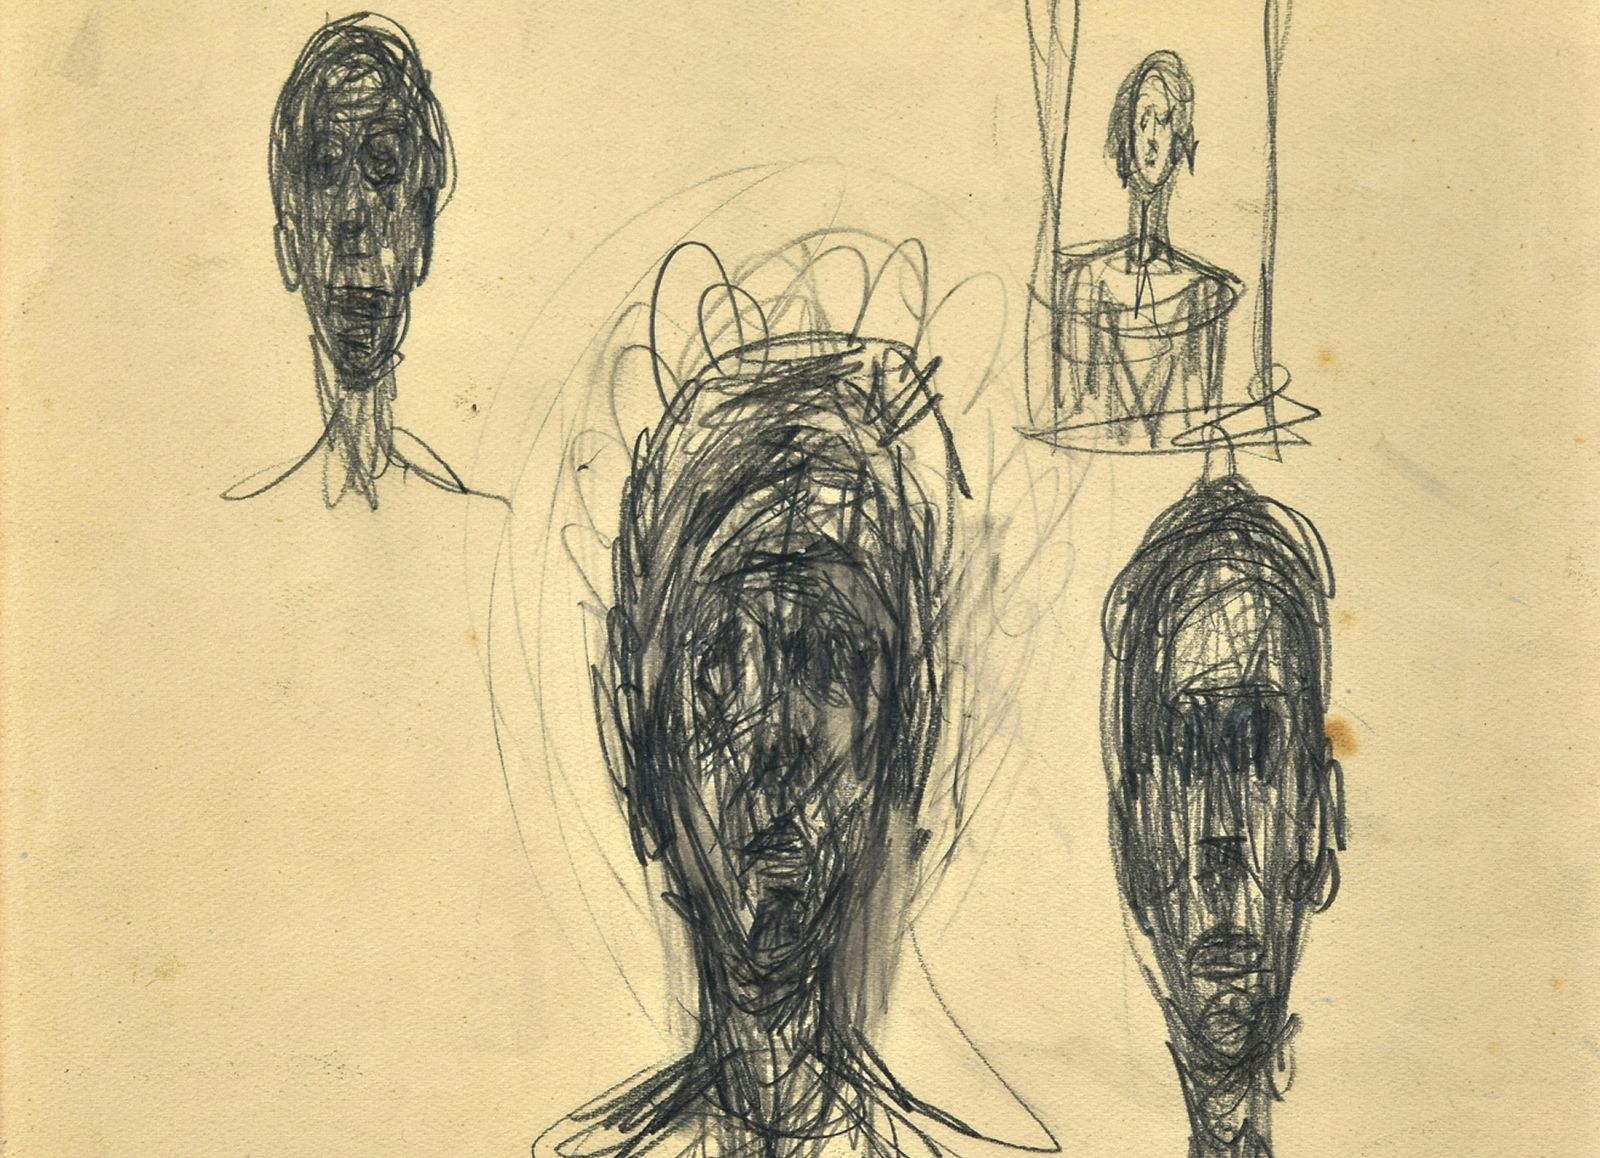 Two ‘Lost’ Alberto Giacometti Drawings Found in Antique Dealer’s Collection